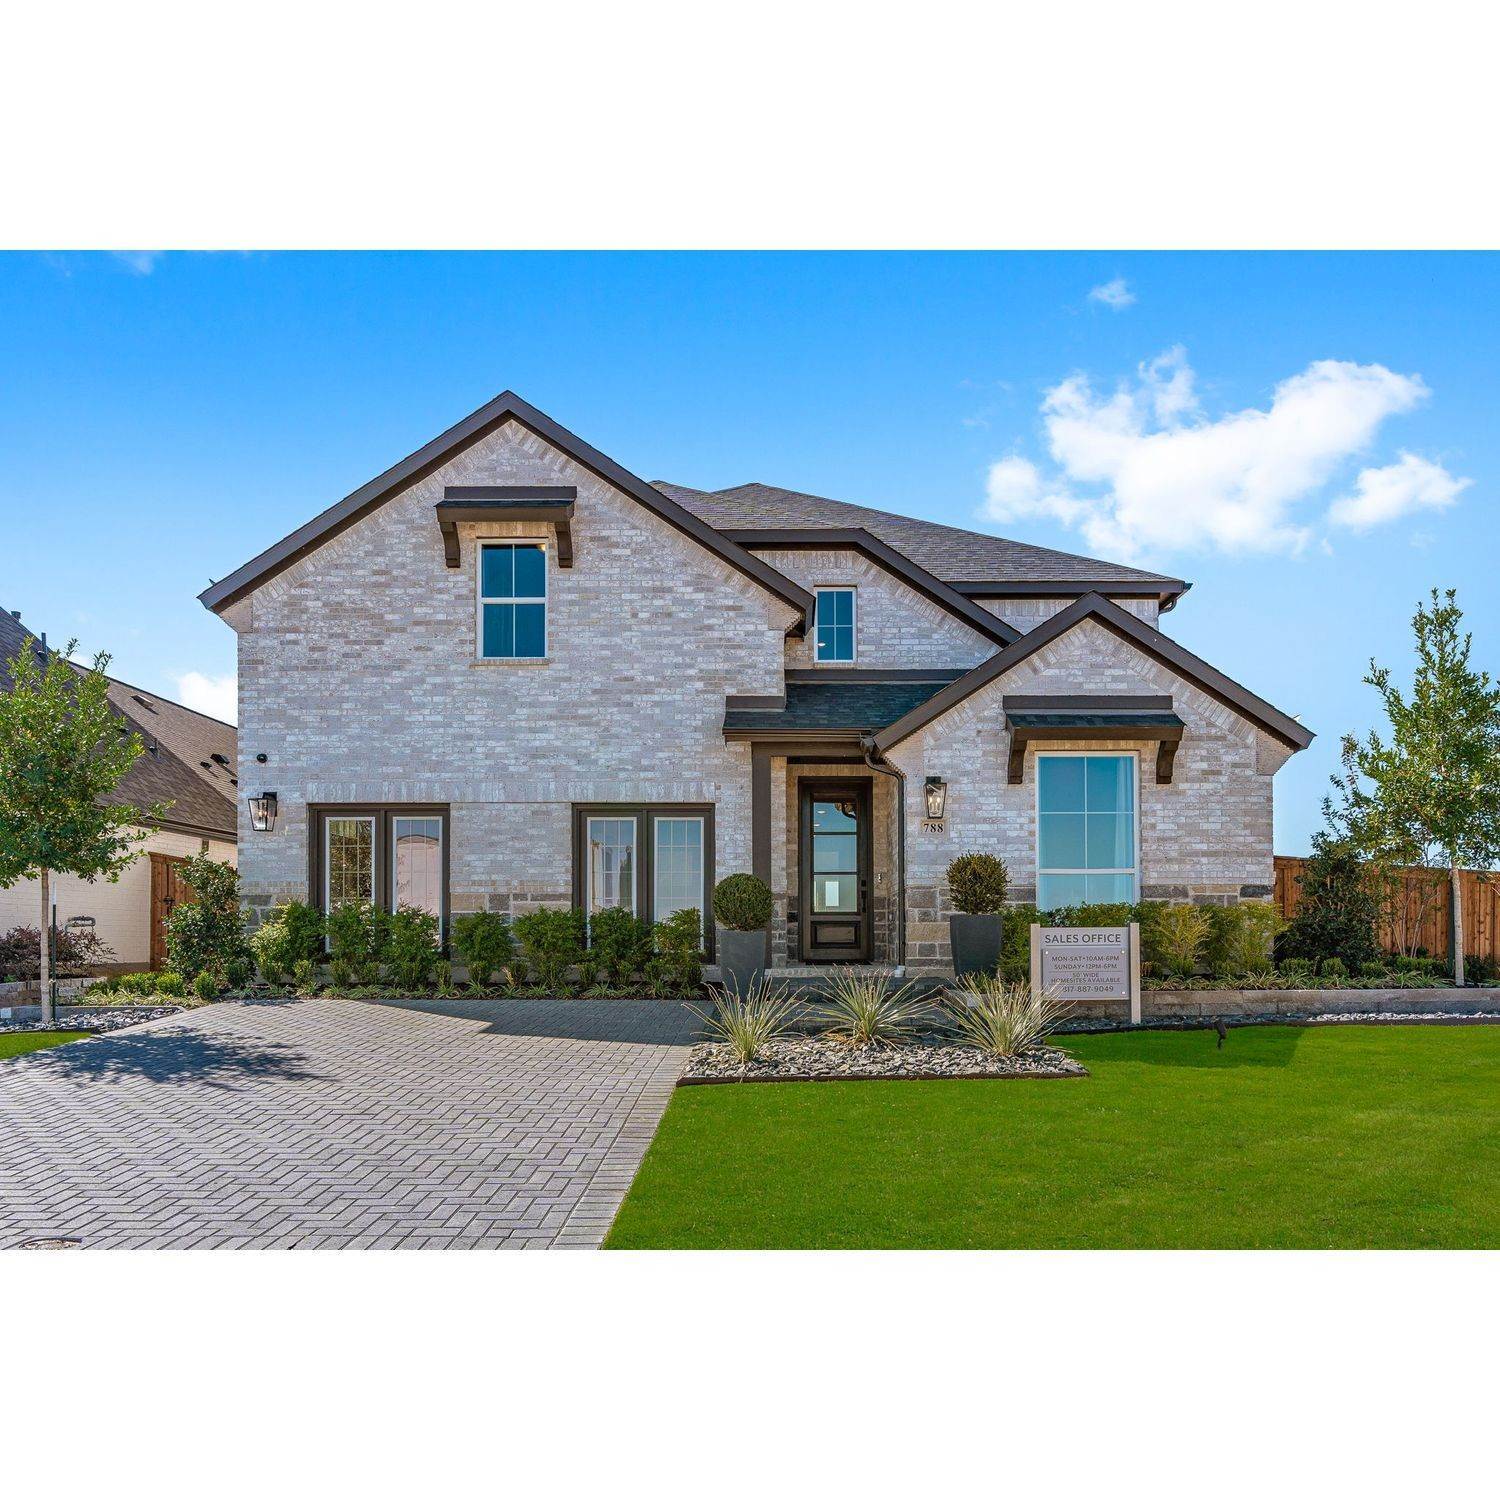 Sweetgrass building at 788 Cedarwood Court, Haslet, TX 76052